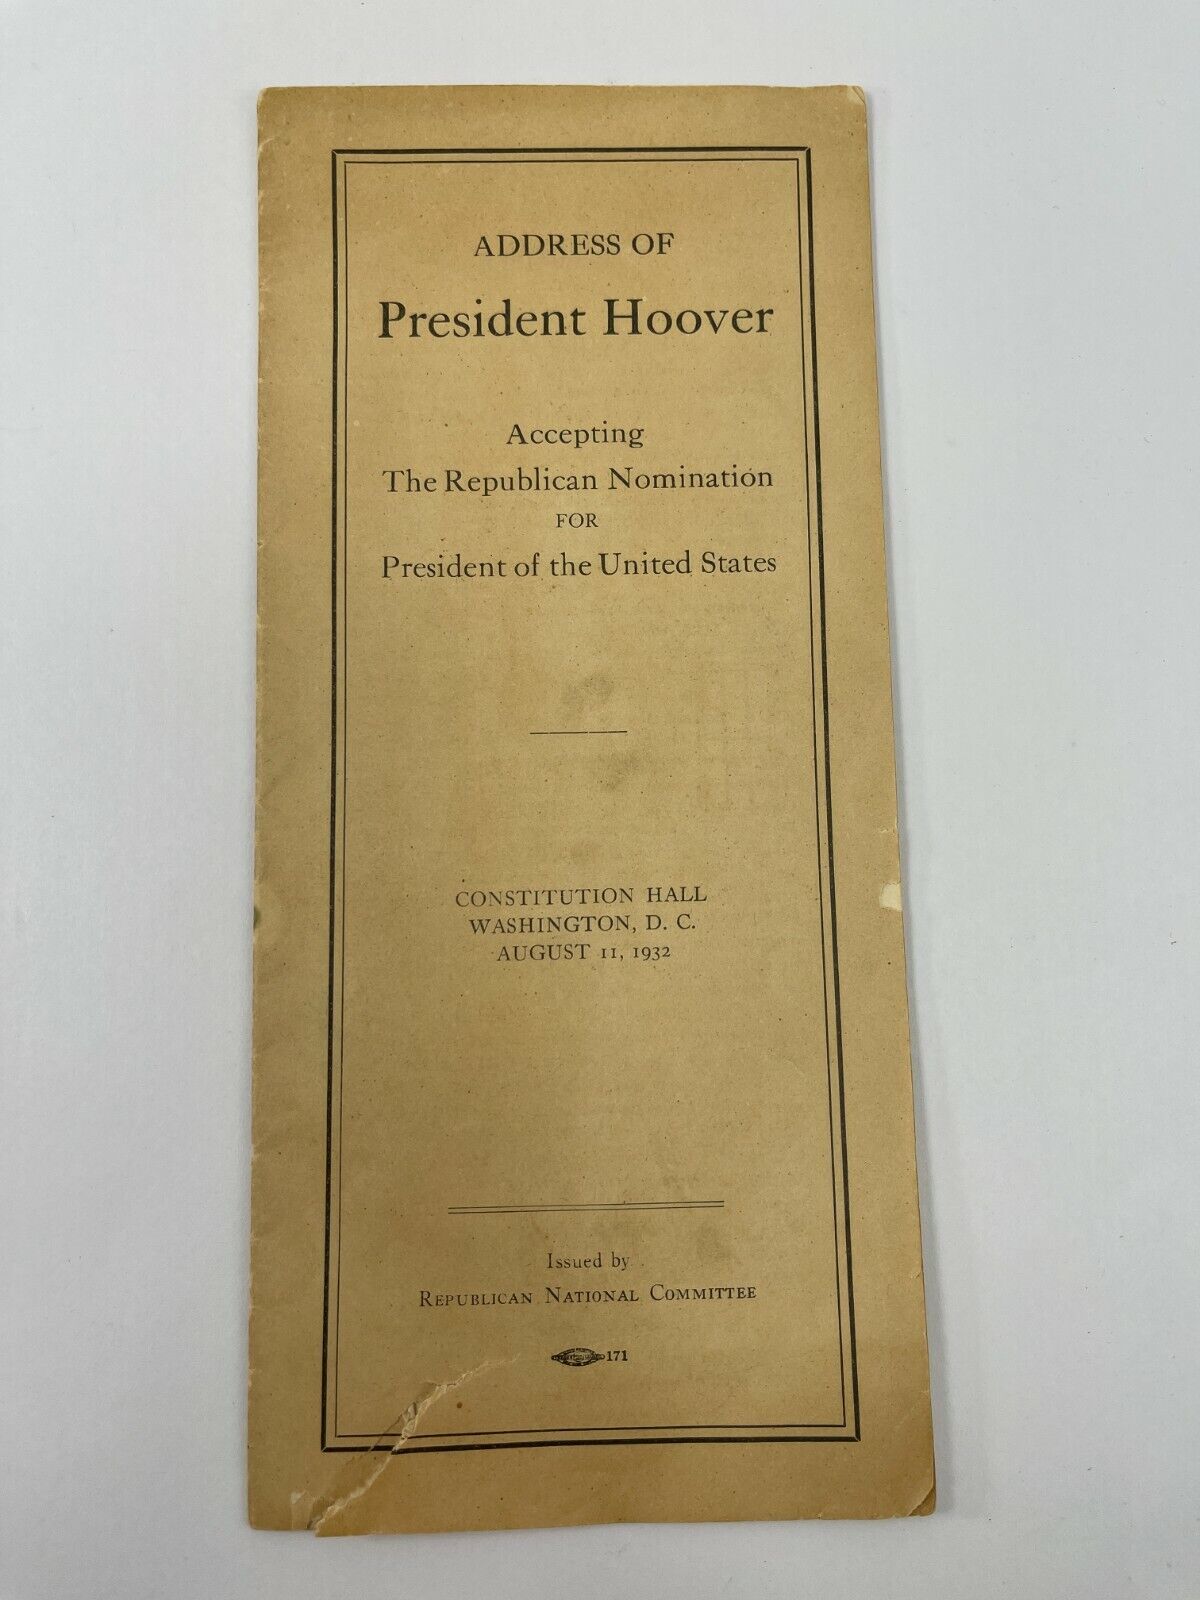 VINTAGE 1932 REPUBLICAN NATIONAL COMMITTEE ADDRESS OF PRESIDENT HOOVER 